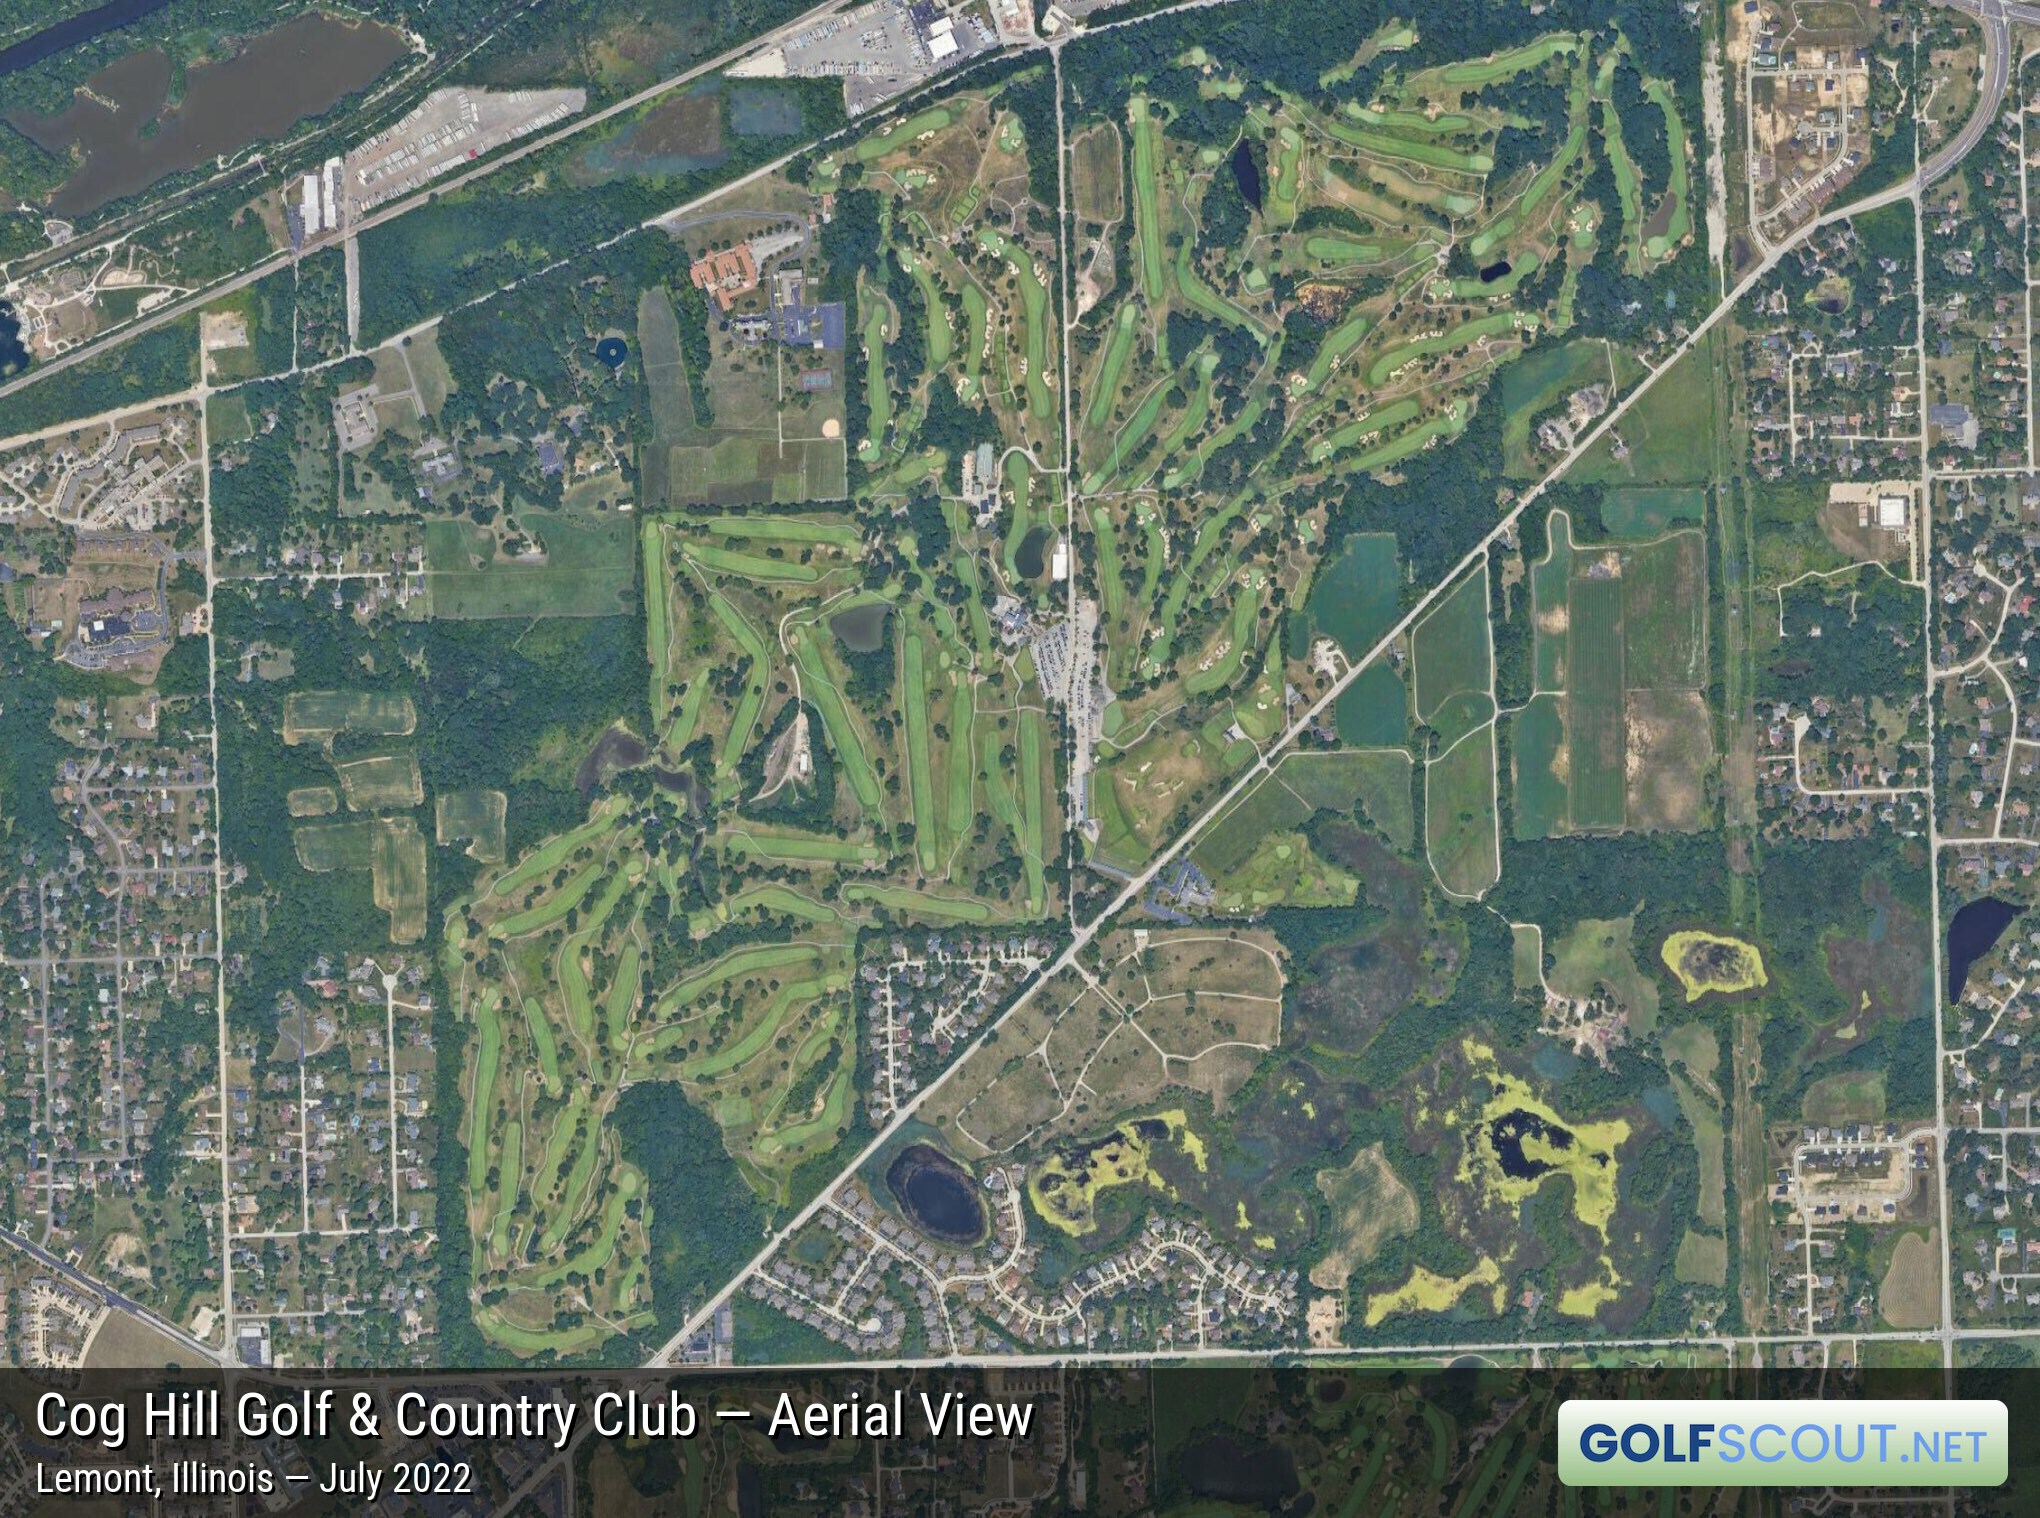 Aerial satellite imagery of Cog Hill Course #1 in Palos Park, Illinois. Cog Hill has 4 courses. Course 1 and 3 intertwine in the southwest portion of the property. Image courtesy of Google Maps.